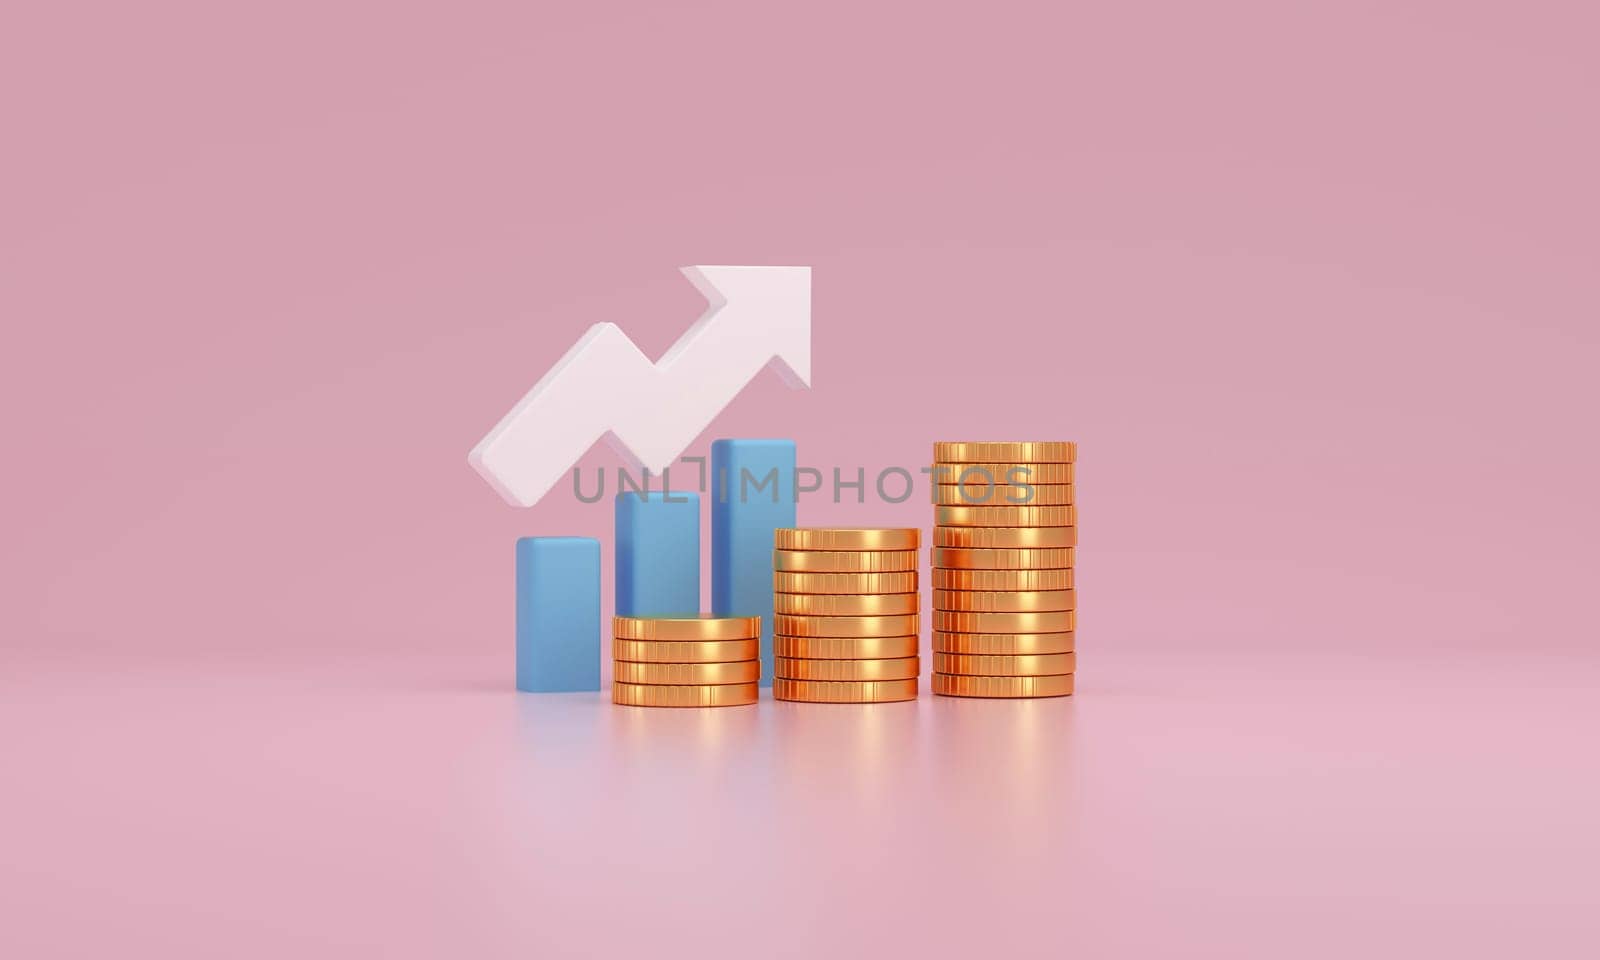 3D illustration depicting financial growth, featuring a white upward arrow among rising blue bar graphs and stacks of gold coins, set against a soft pink background.